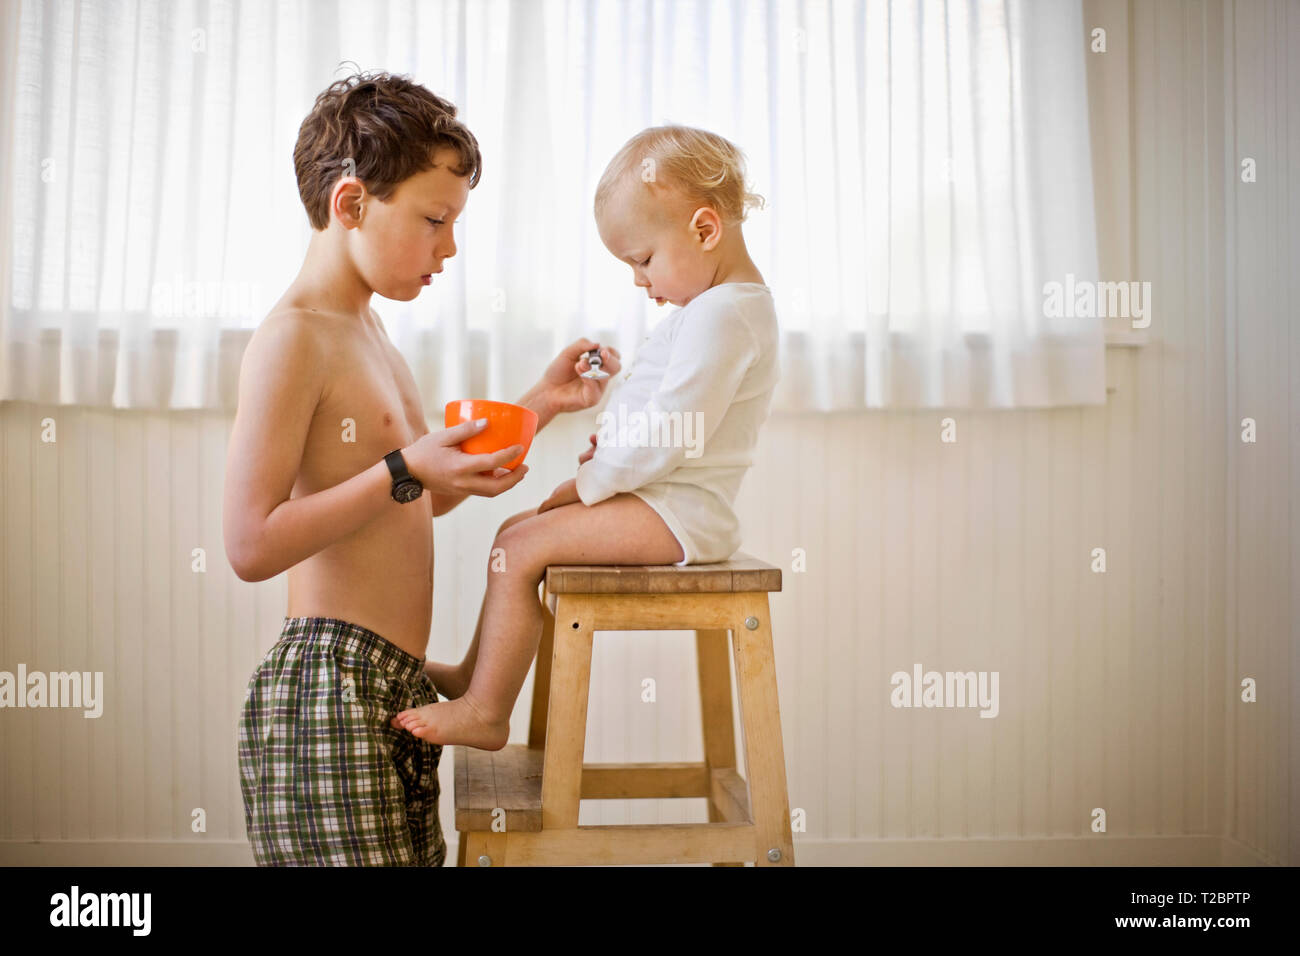 Shirtless Boy Feeding His Little Brother With A Spoon As He Sits On A